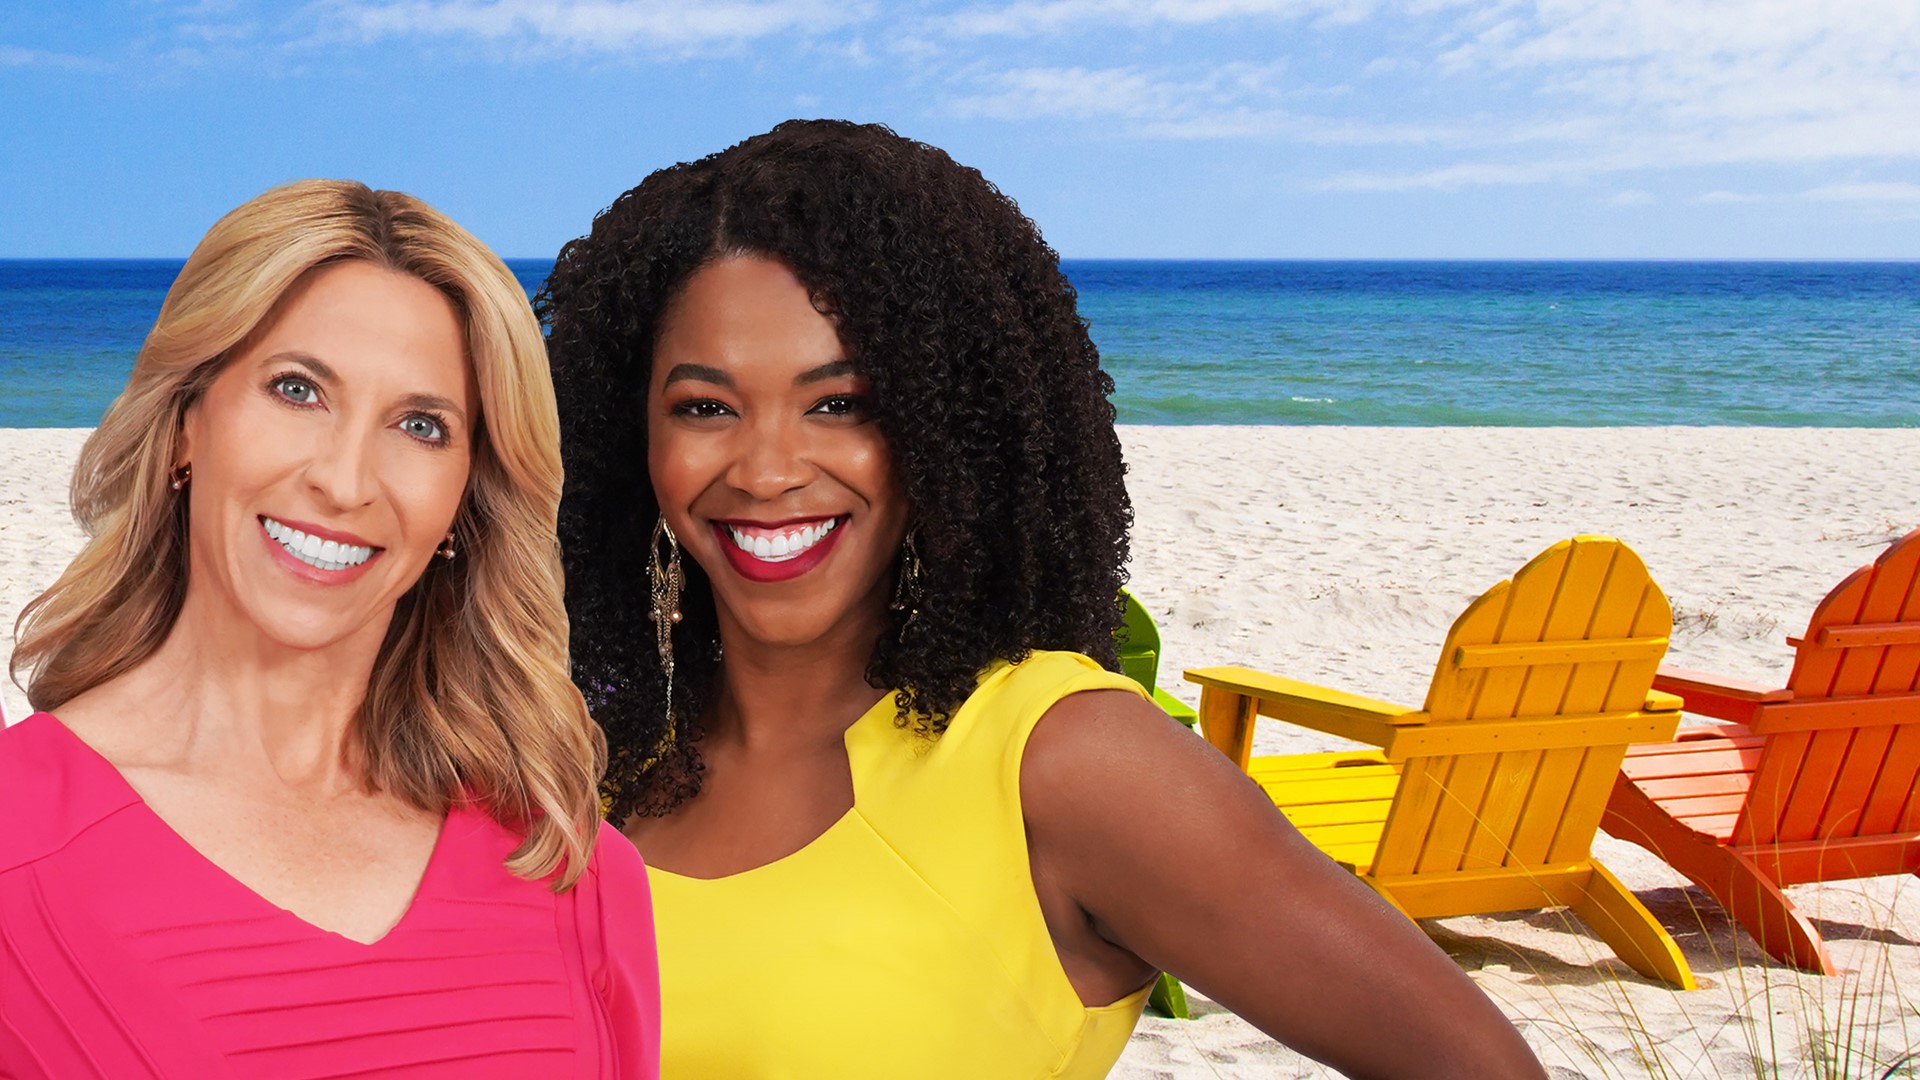 Tampa's only live weekday lifestyle show offers local shopping tips and fitness advice while also taking you inside the best restaurants and music scenes.